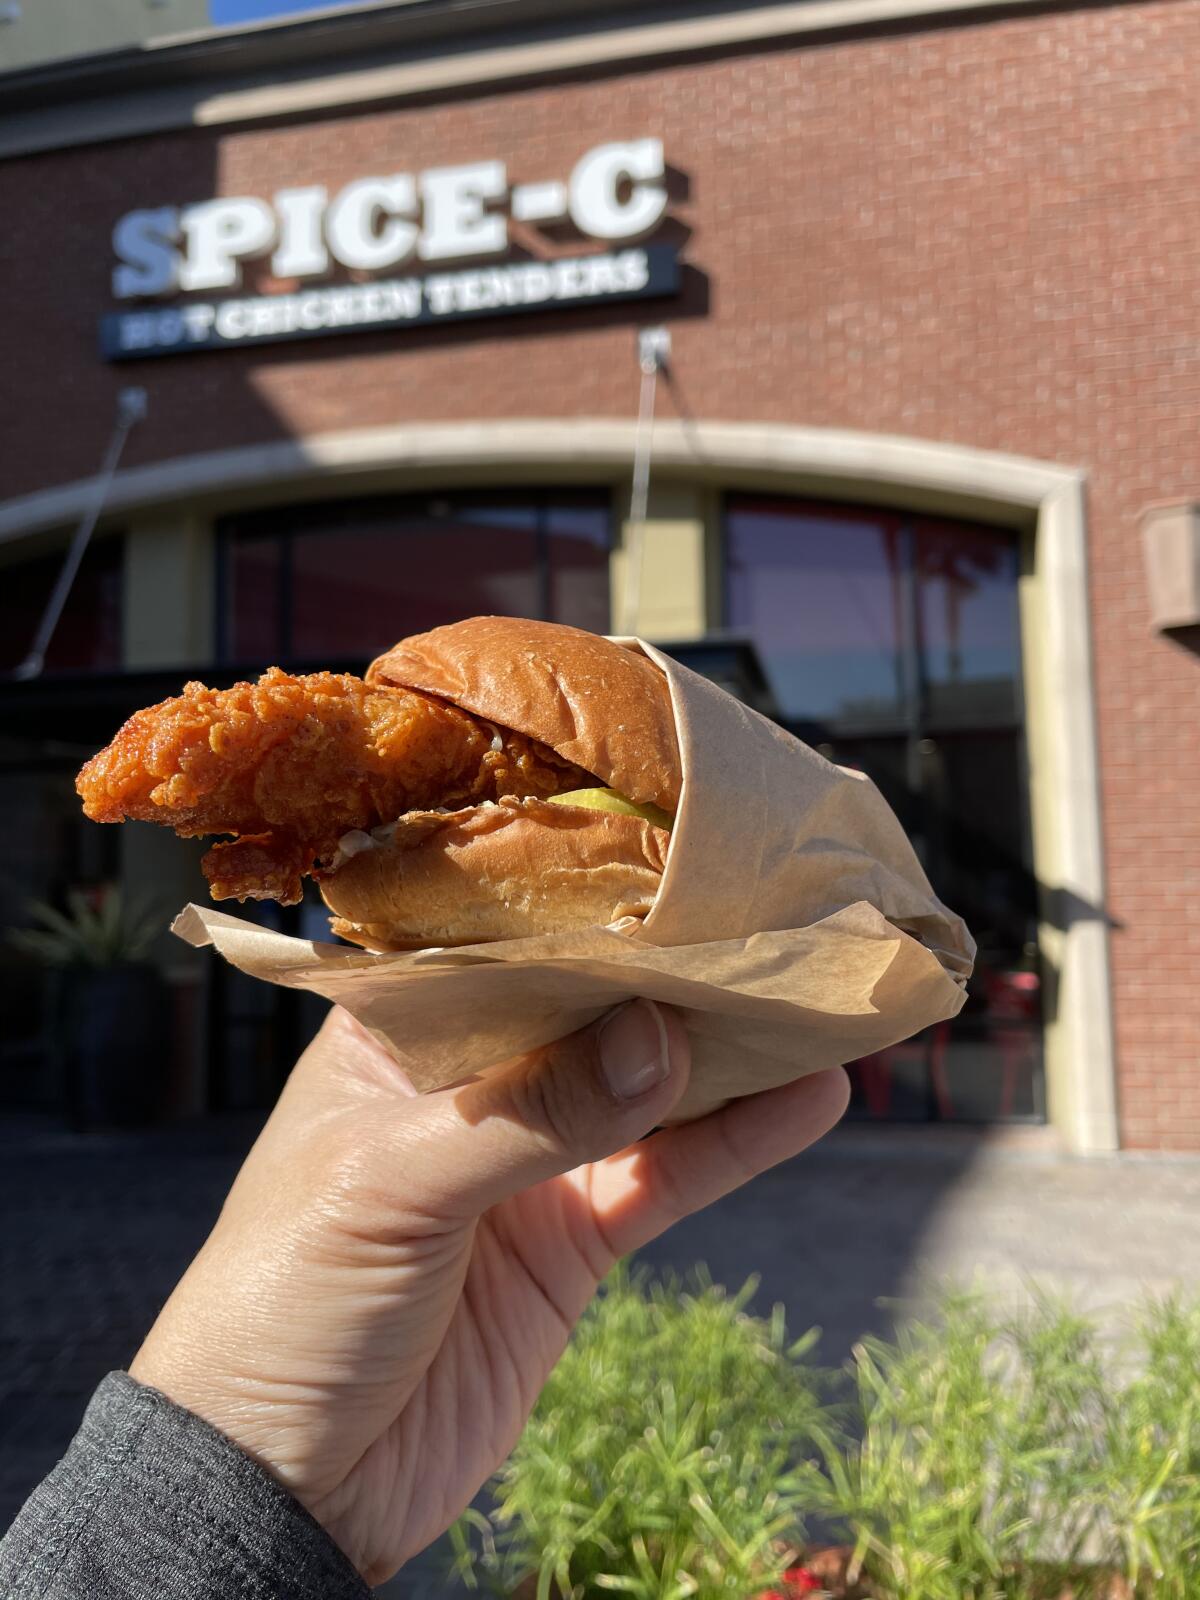 Spice-C, at 2455 Park Ave, Tustin, has its own Nashville hot chicken sandwich.